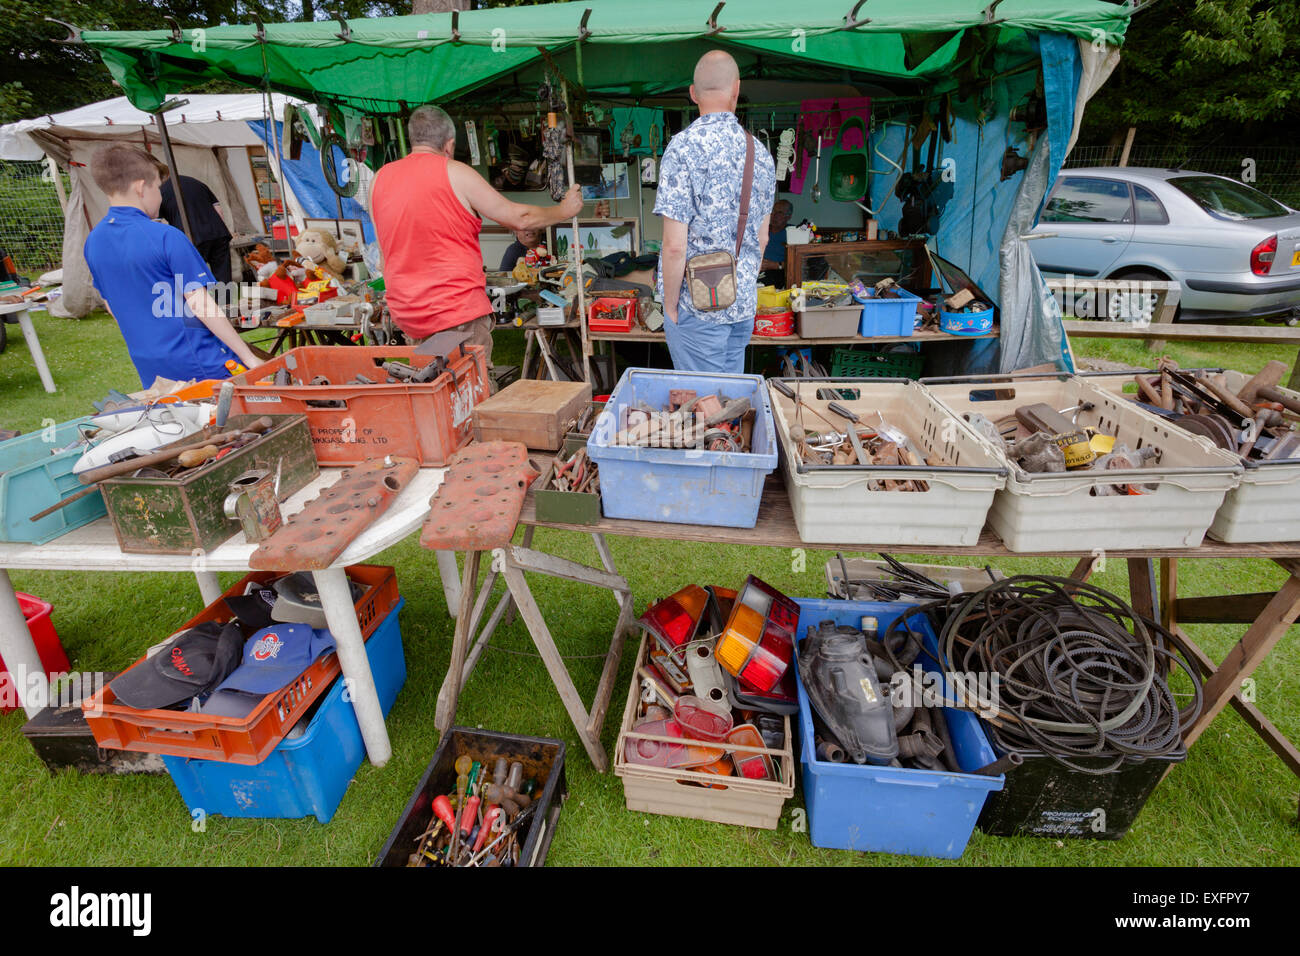 Outdoor market stall at a classic car show, selling car parts and tools, UK Stock Photo